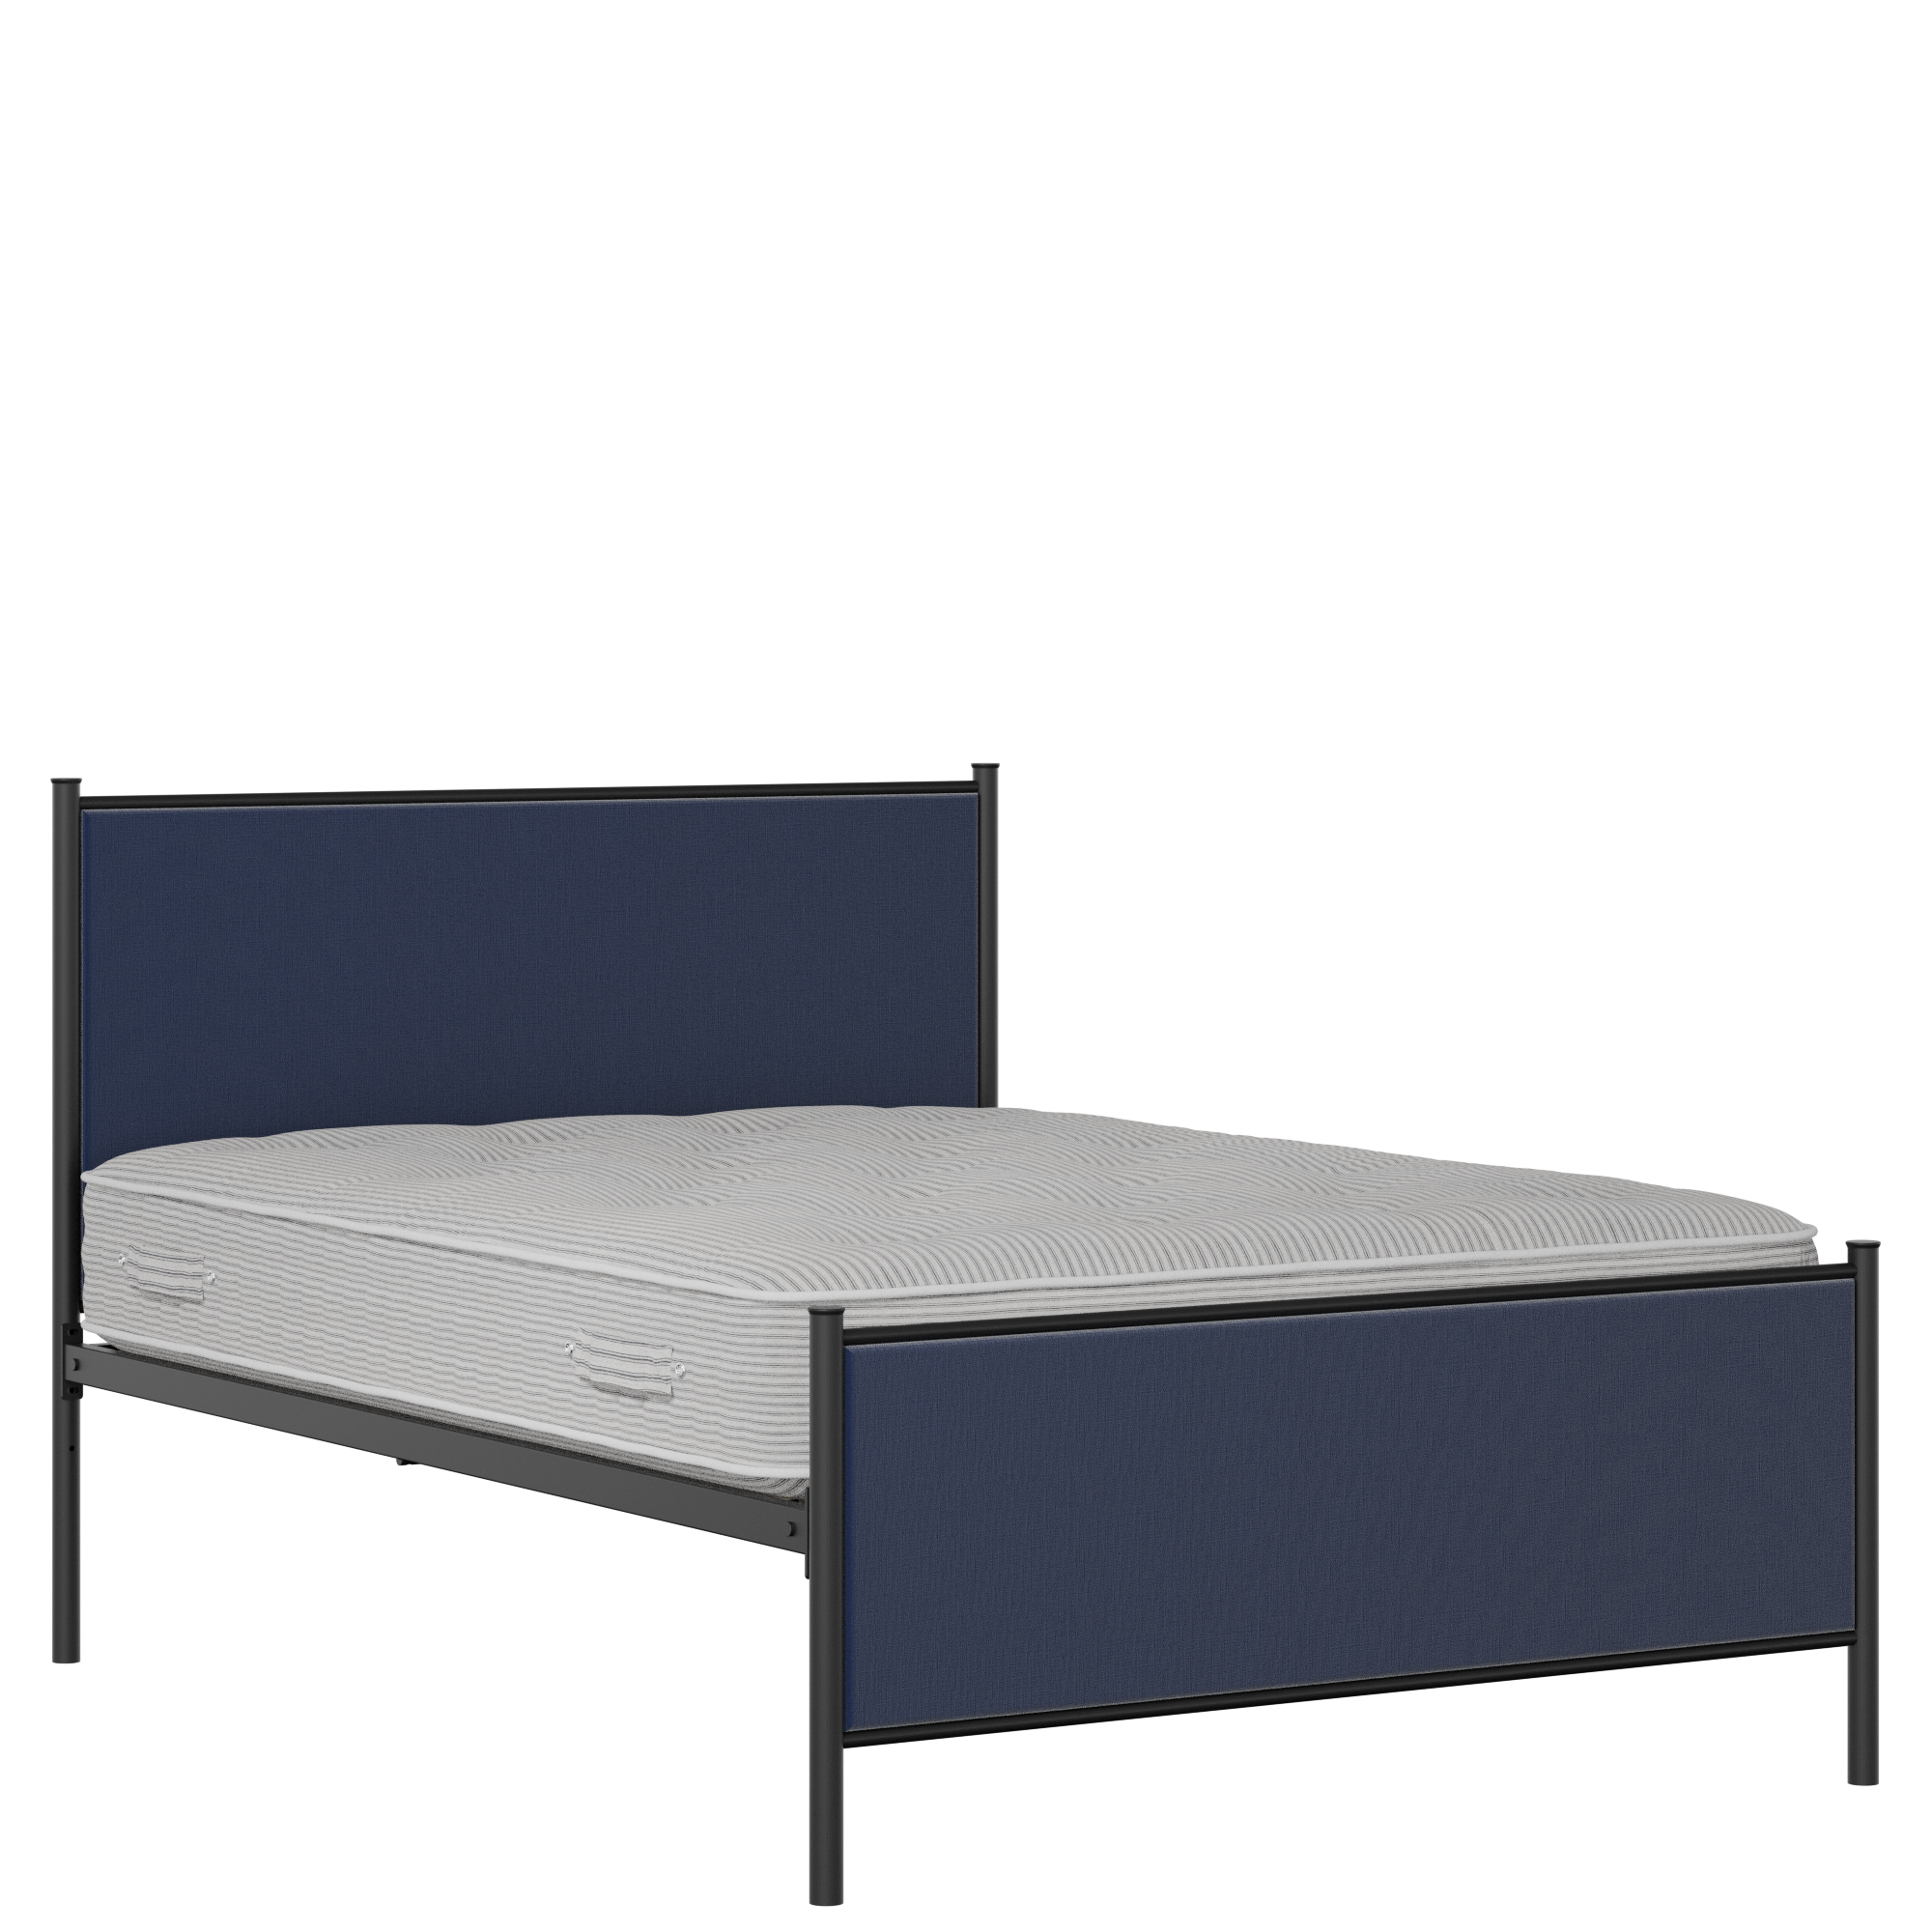 Brest iron/metal upholstered bed in black with blue fabric